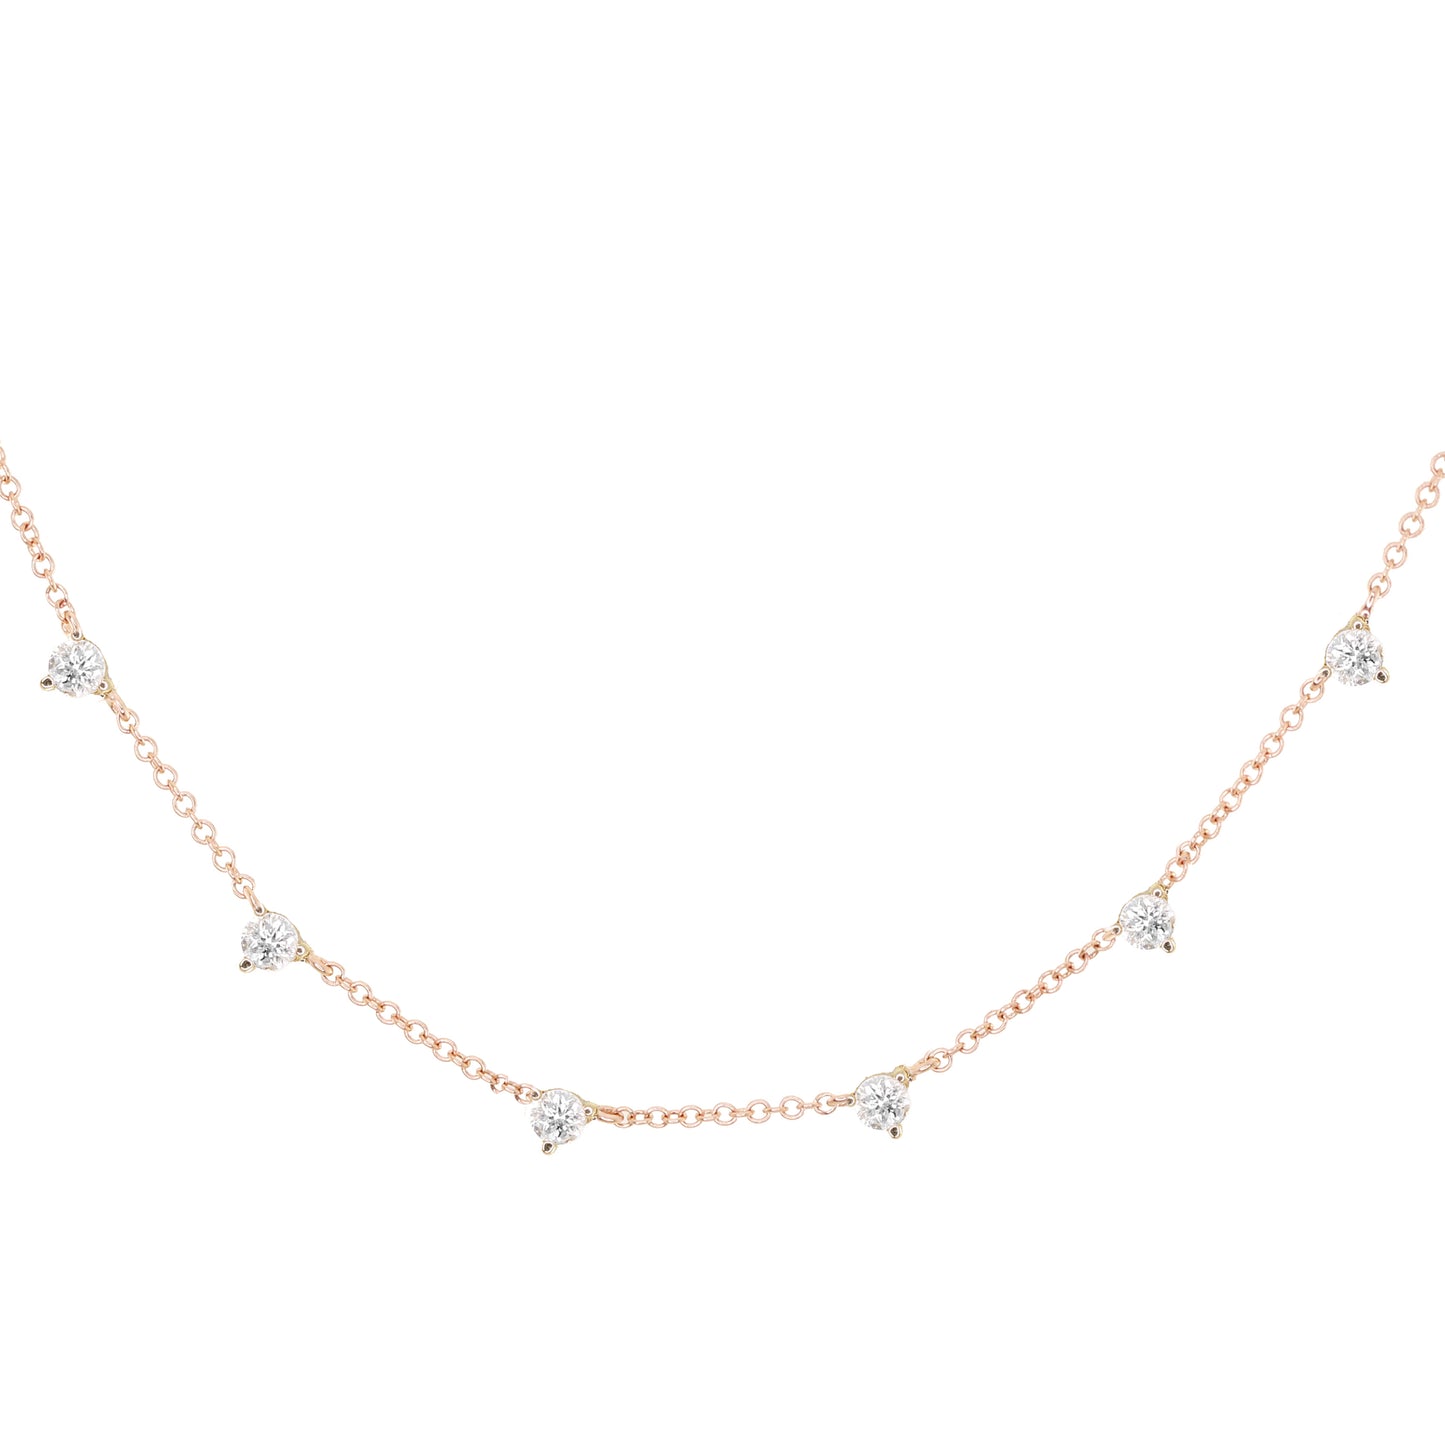 14kt gold spaced diamond prong choker necklace